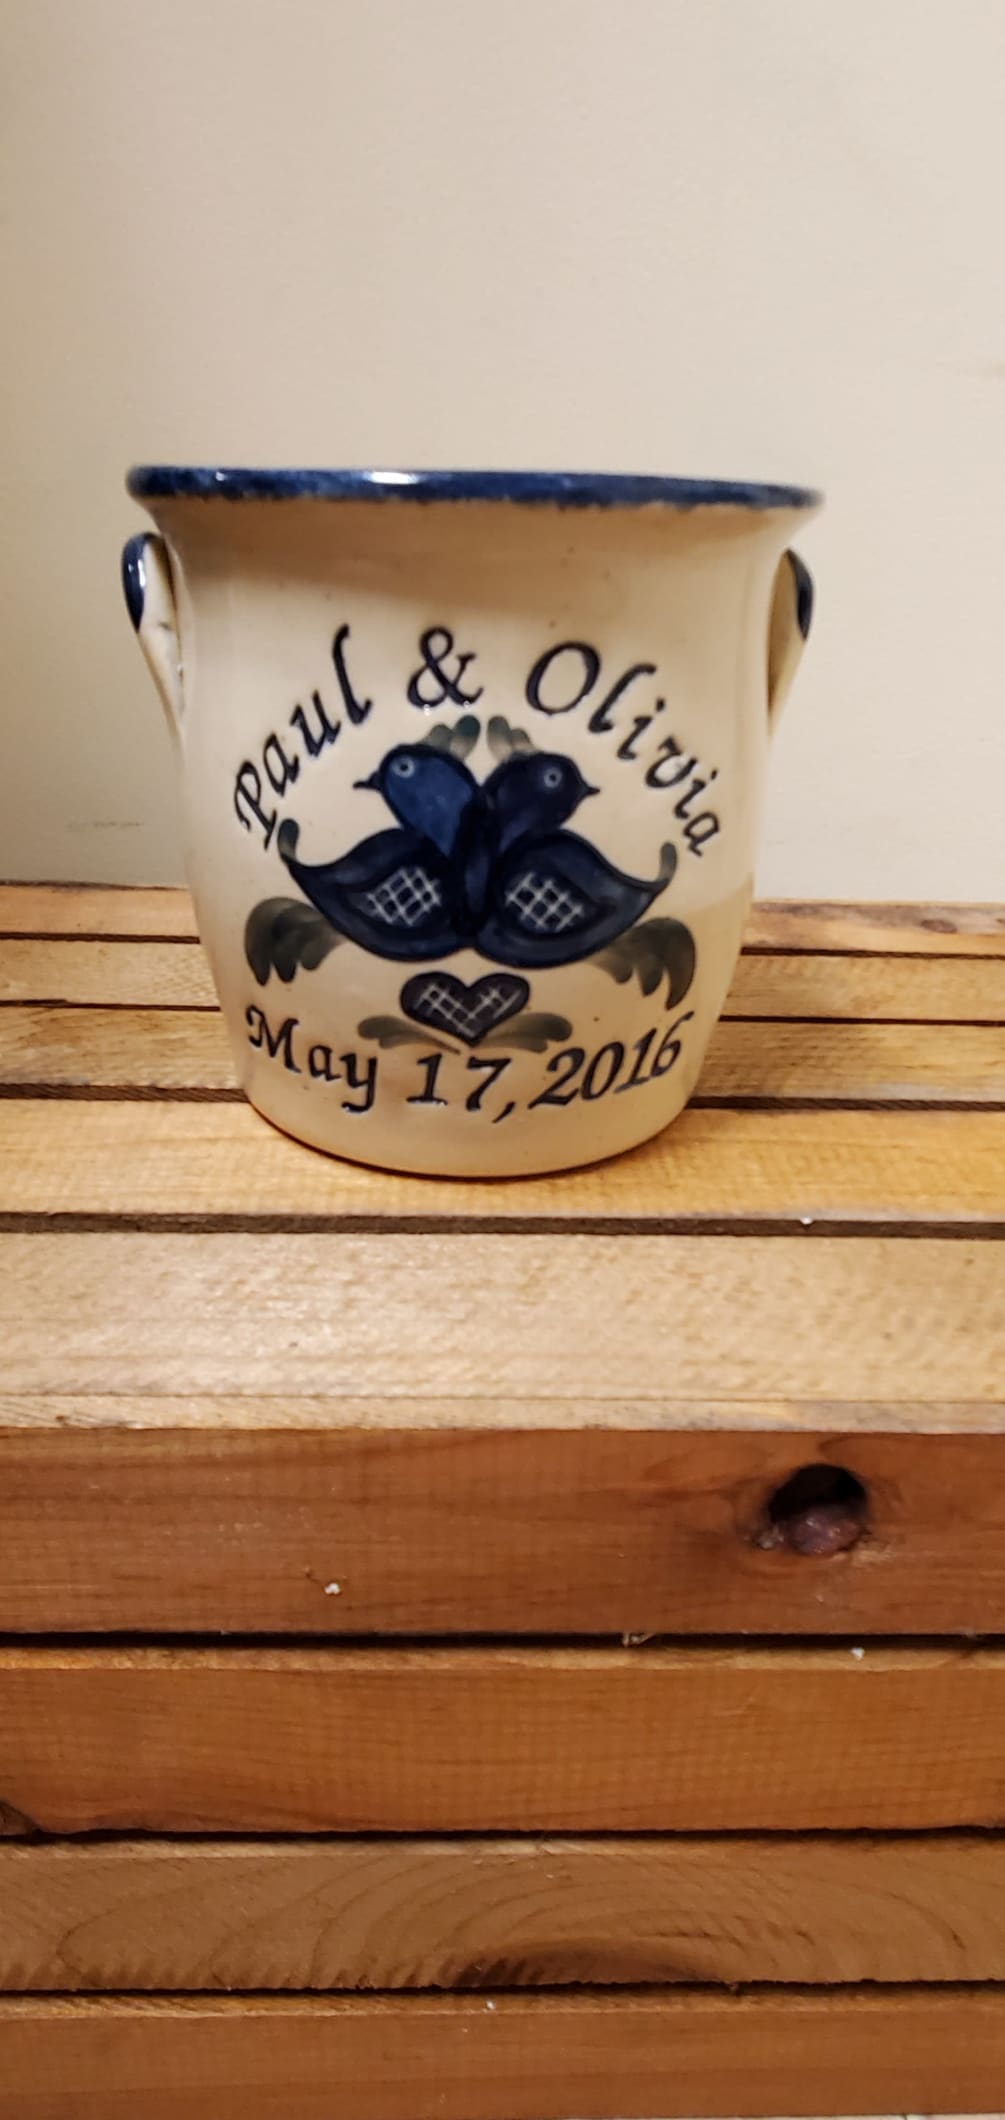 Great Wedding gift for family or friends
Available in Blue, Green or Blue